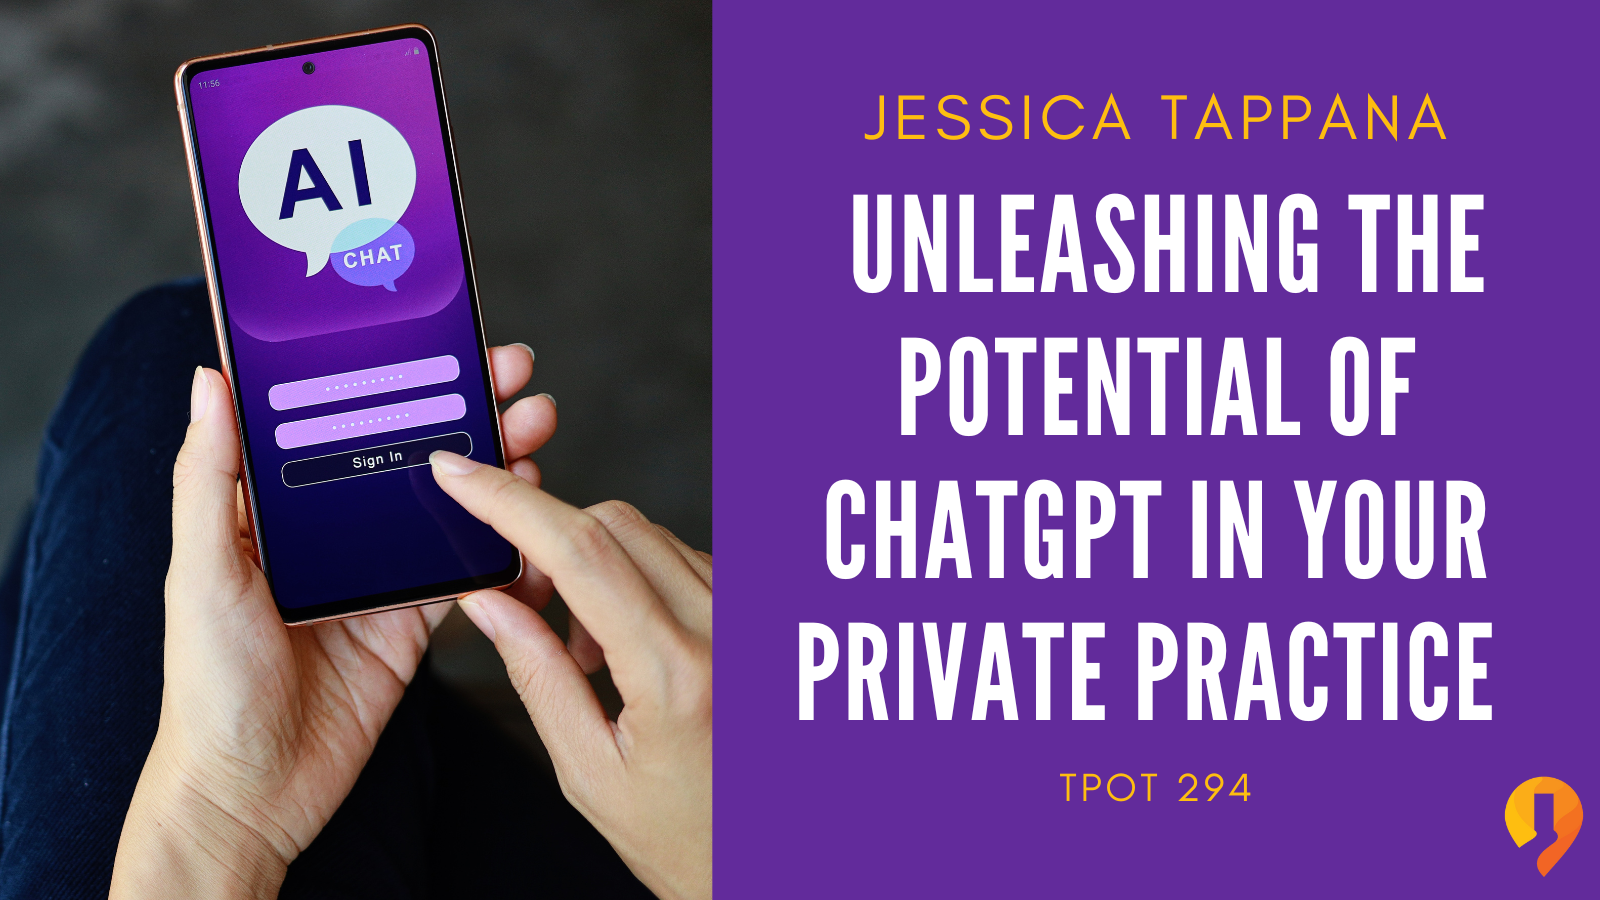 Jessica Tappana Unleashing the Potential of ChatGPT in Your Private Practice TPOT 294